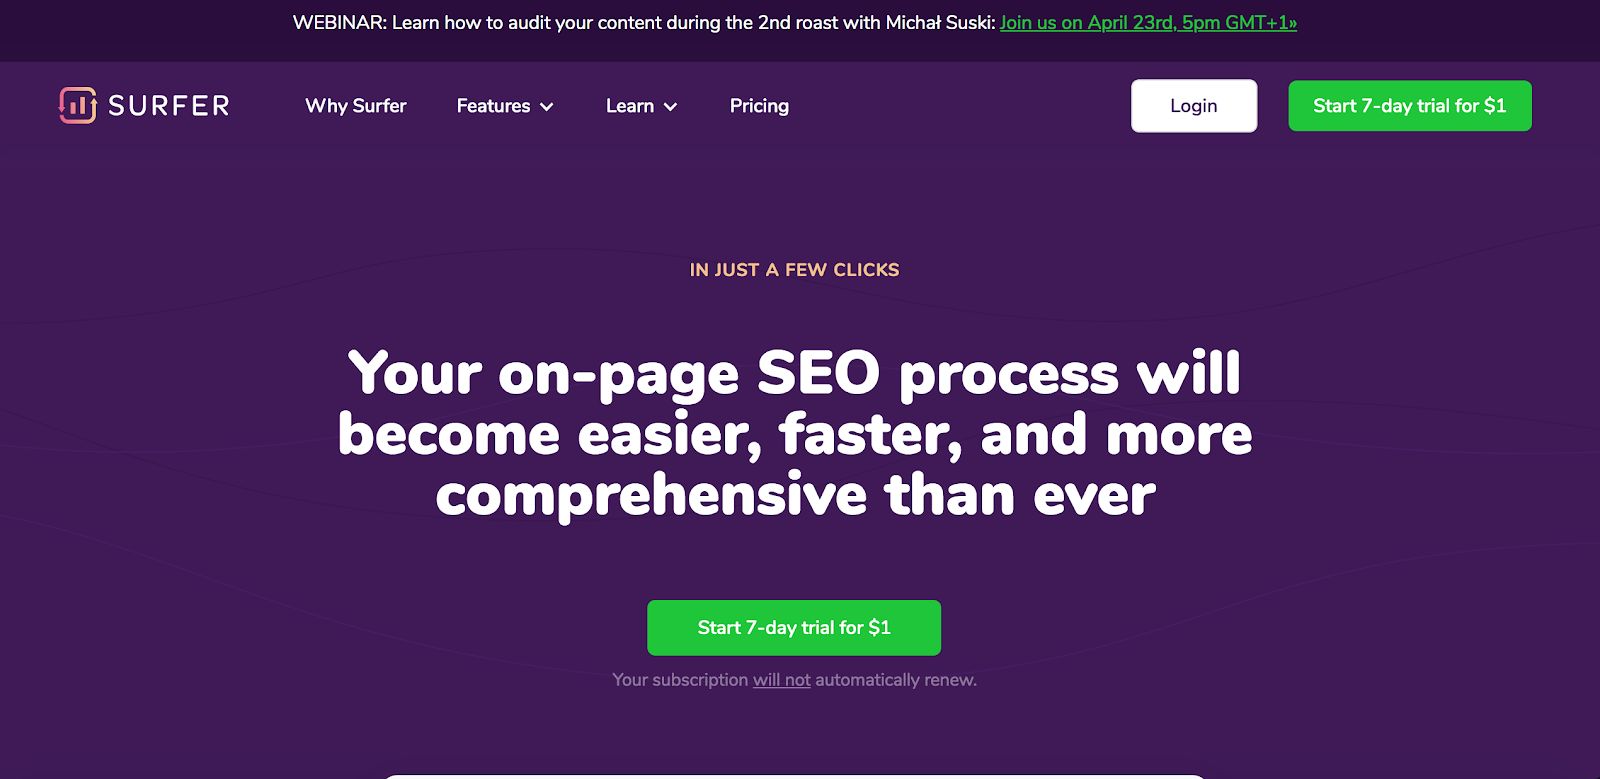 Surfer SEO Review